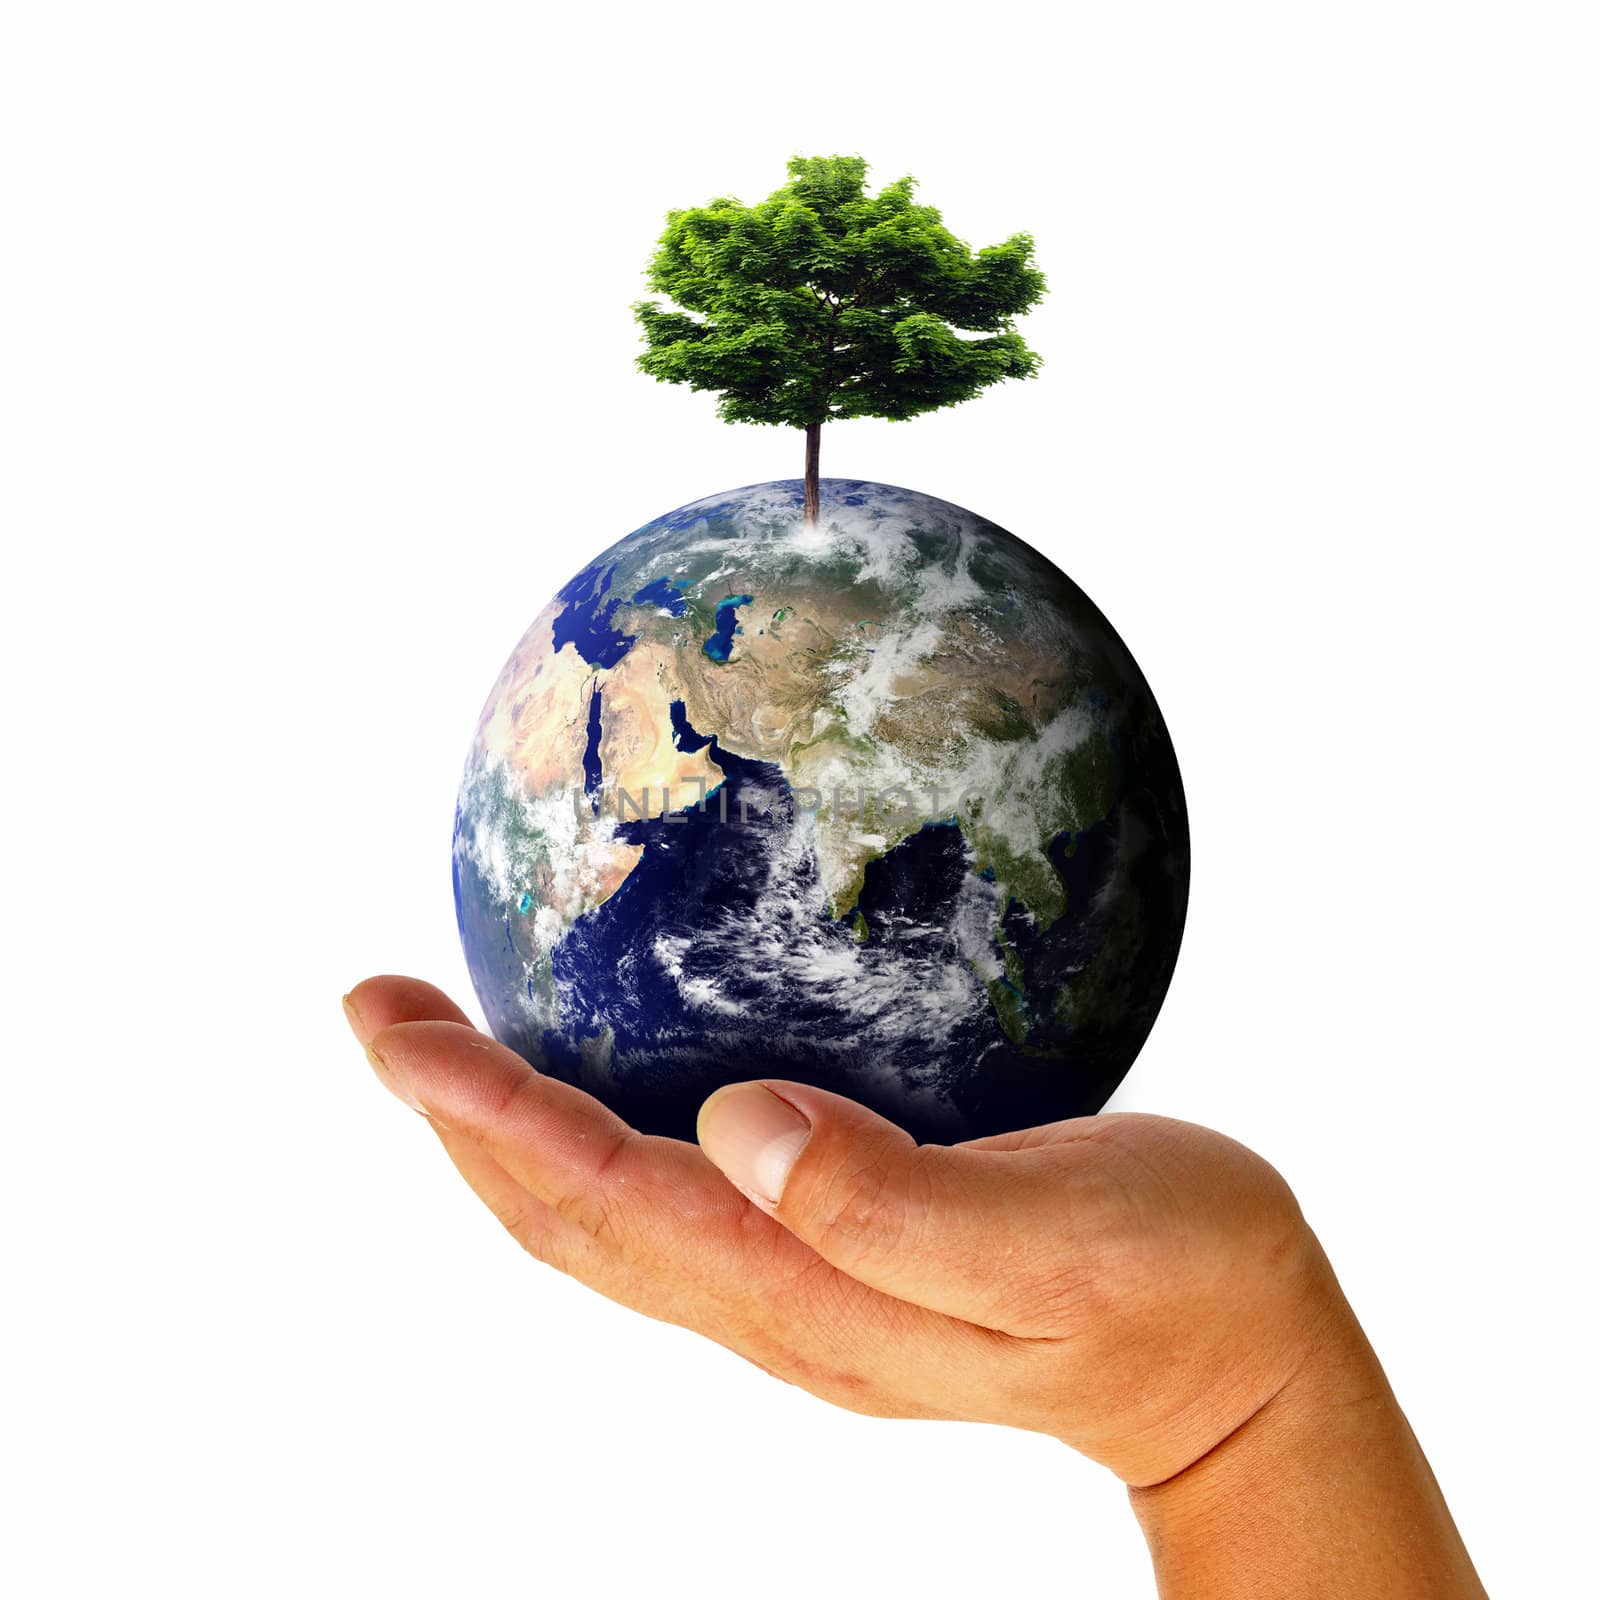 Male hand holding the Earth with tree